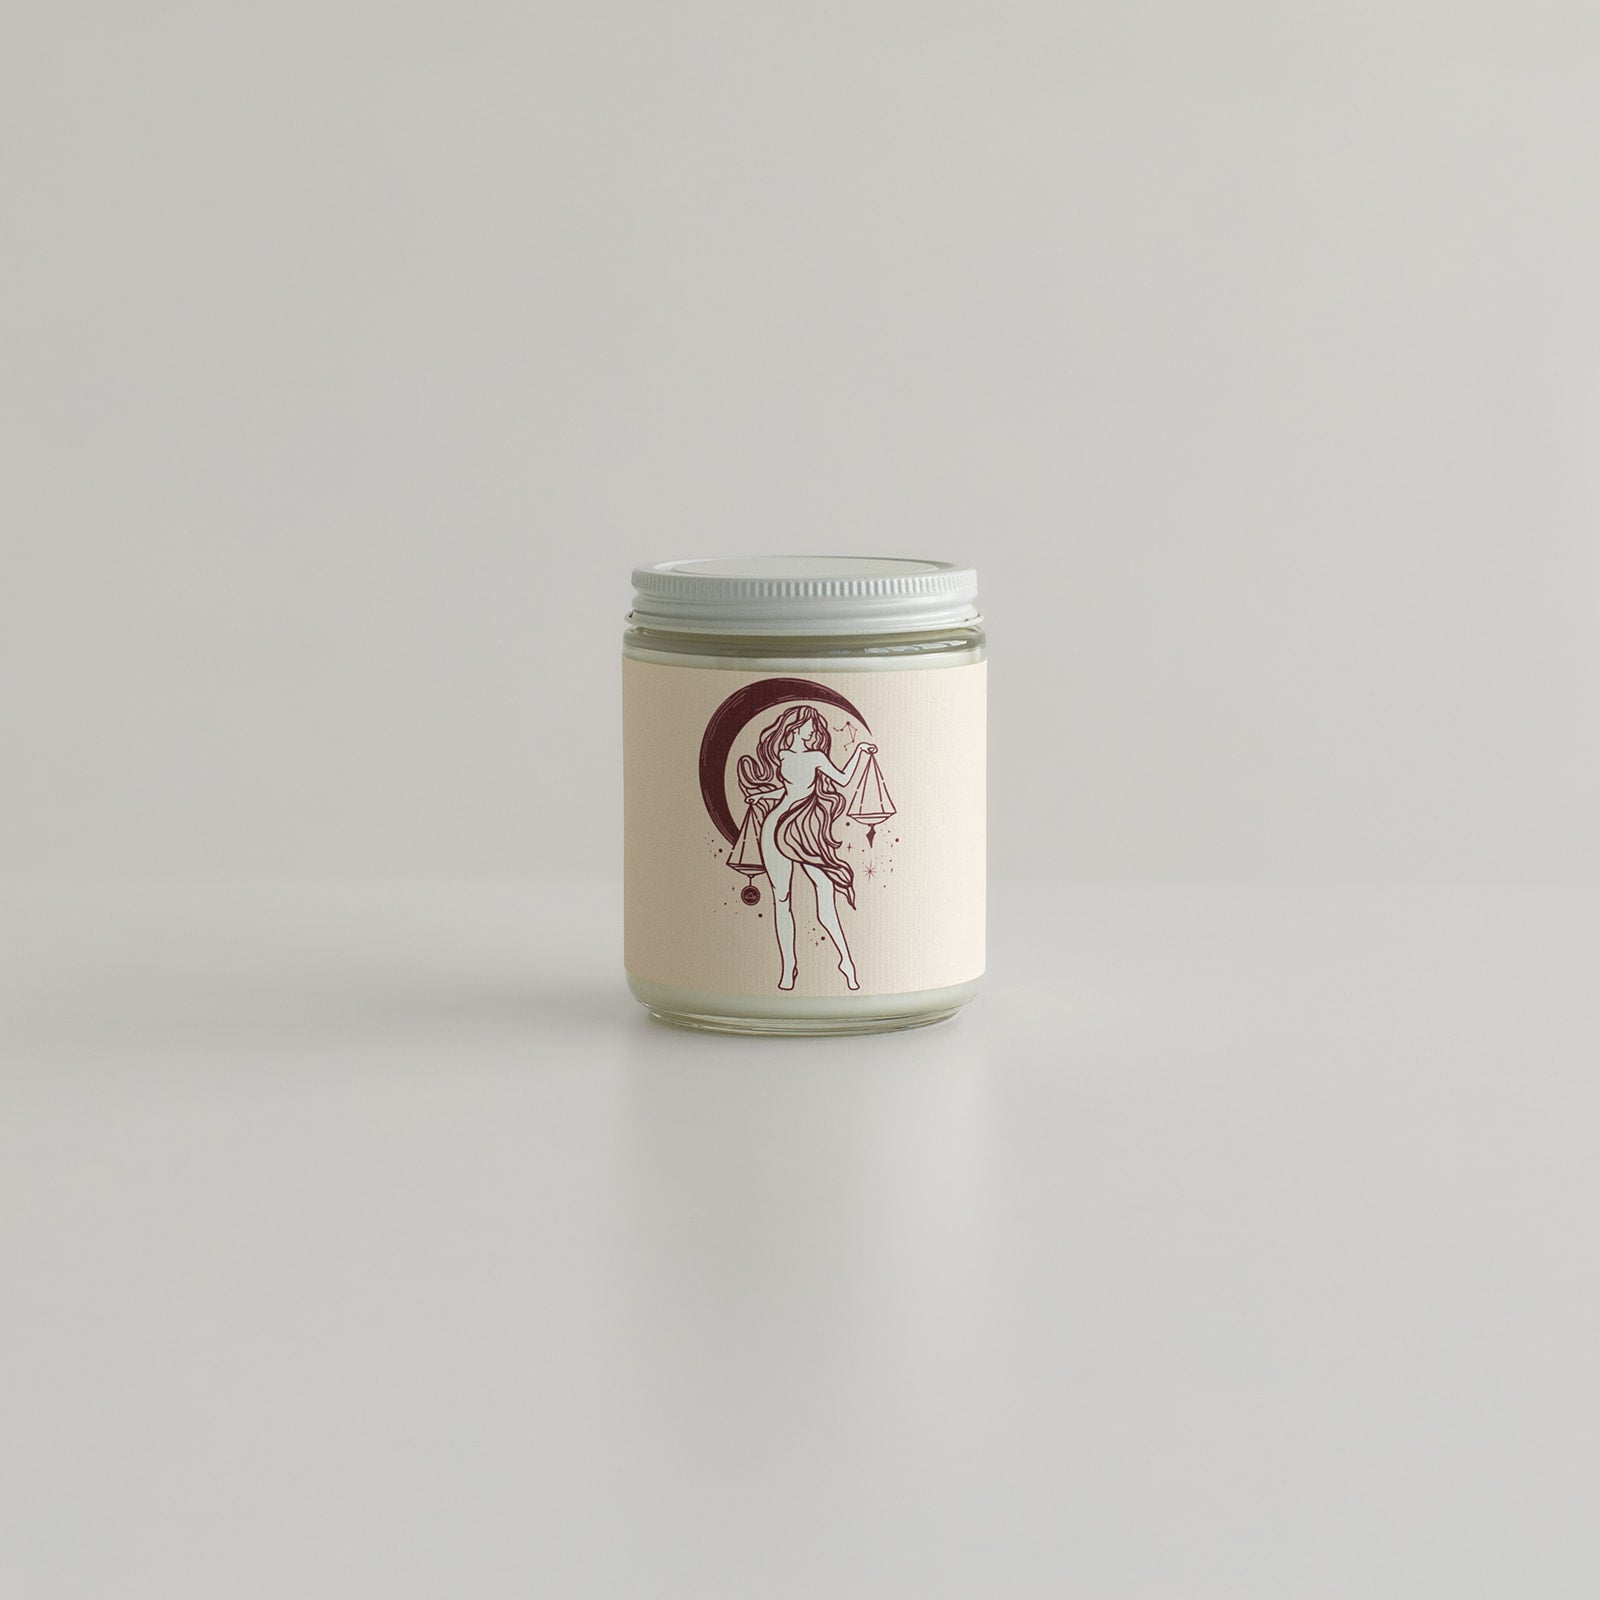 astrology libra candle features zodiac sign with iconic scales and sassy woman on candle jar